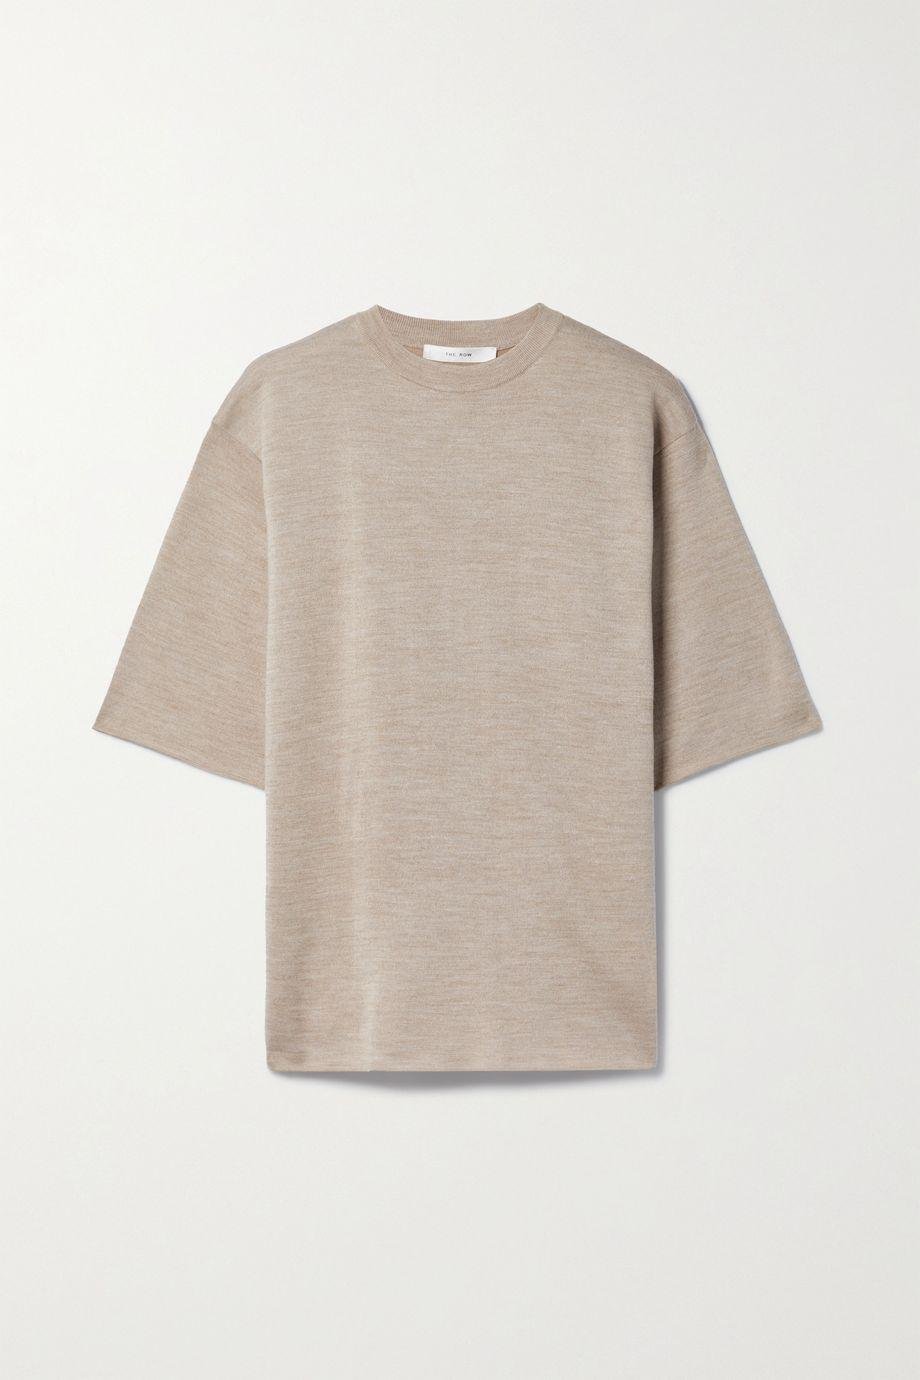 Silas knitted T-shirt by THE ROW